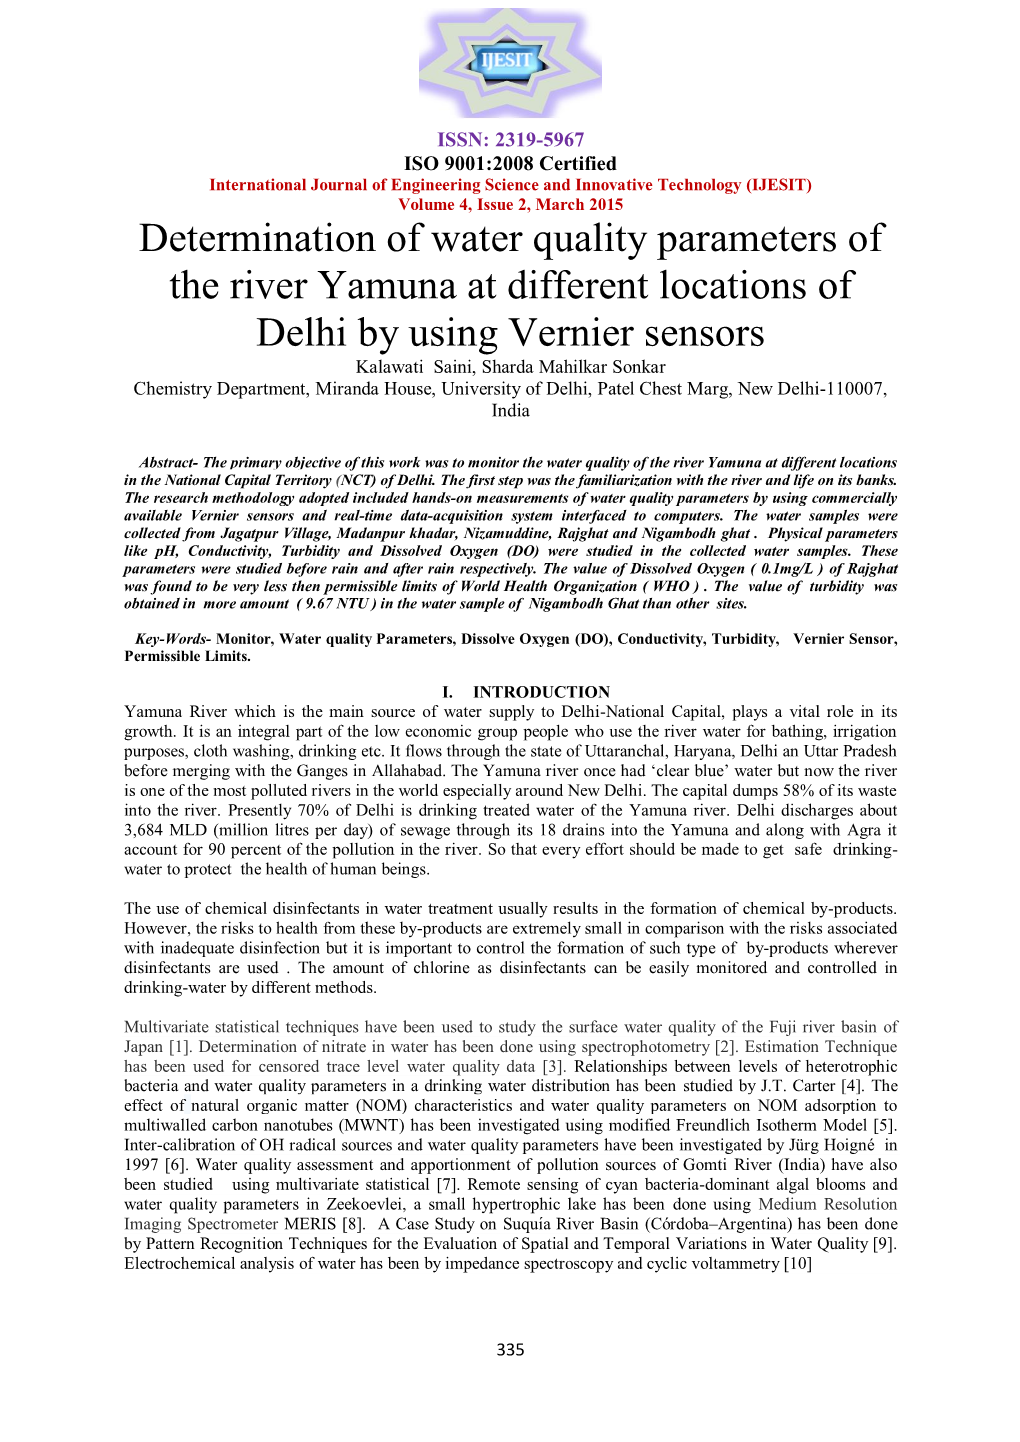 Determination of Water Quality Parameters of the River Yamuna At